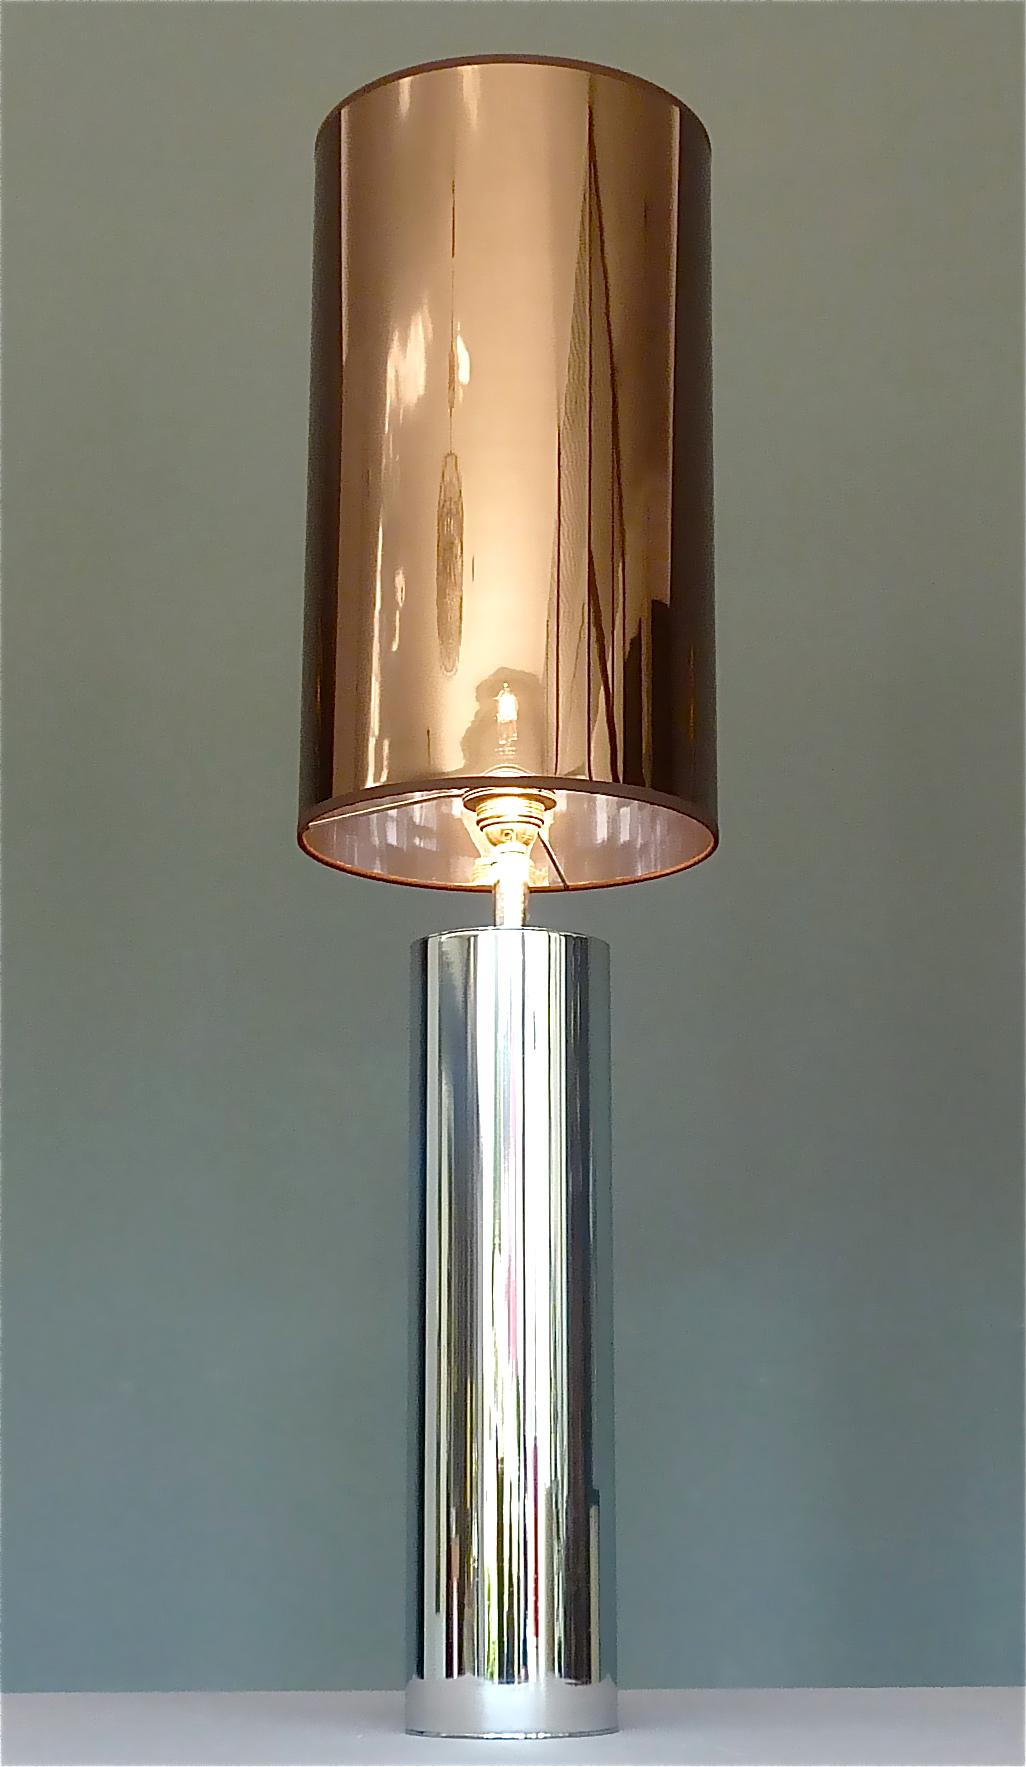 Very chic and monumental chromed steel table lamp in the style of Willy Rizzo or Pierre Cardin, France or Italy 1970s. The tube cylinder lamp base has one fitting for one E27 standard screw bulb to illuminate. It has a replaced semi transparent